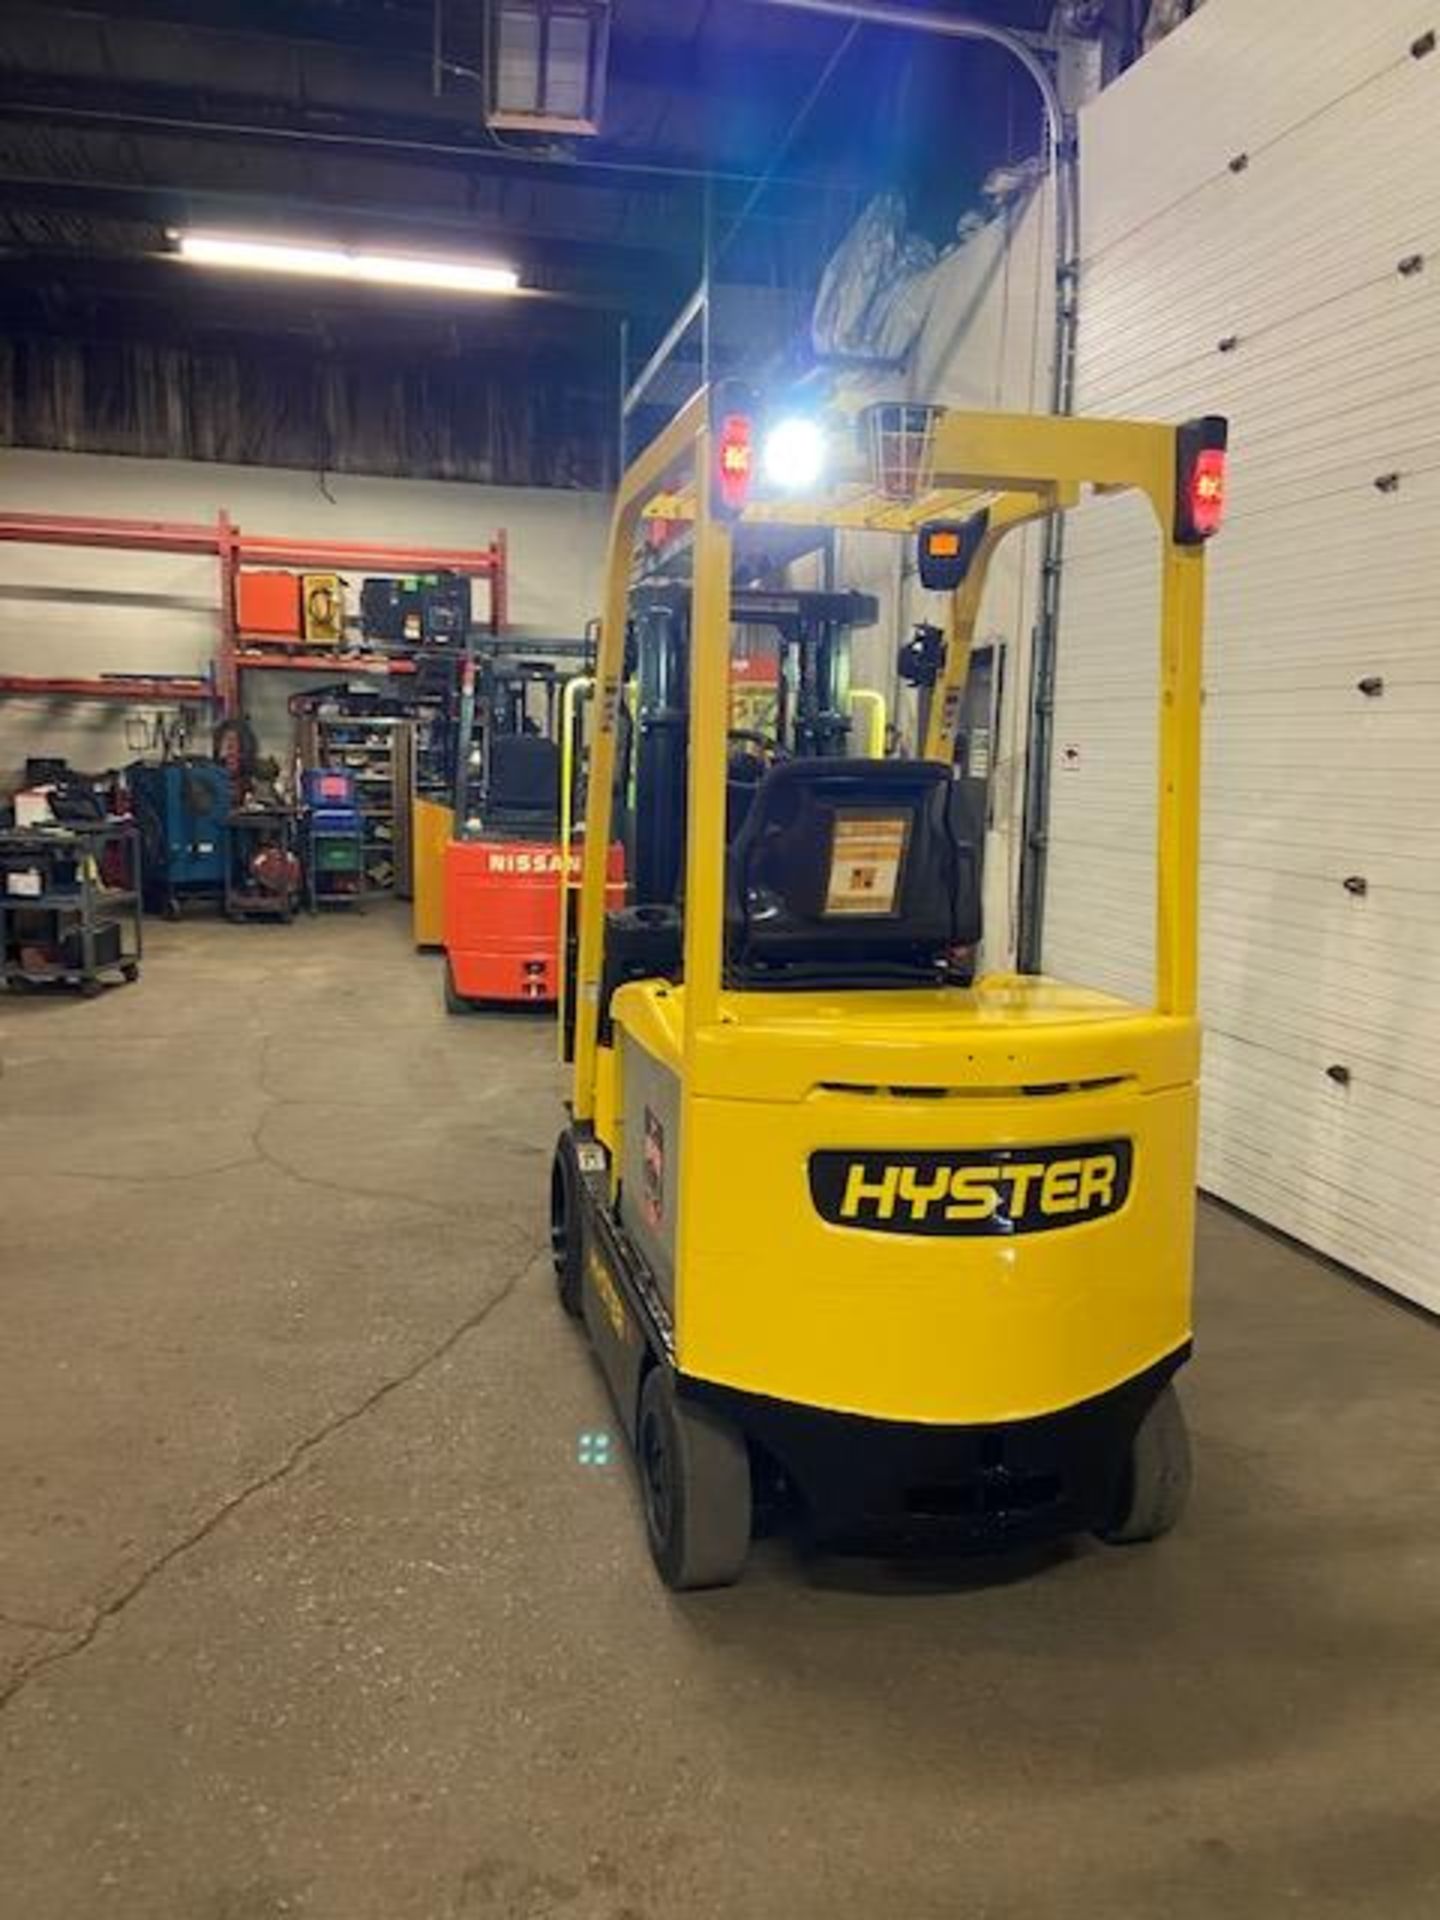 FREE CUSTOMS - 2013 Hyster 5000lbs Capacity Forklift Electric with 3-STAGE MAST with sideshift - Image 3 of 3